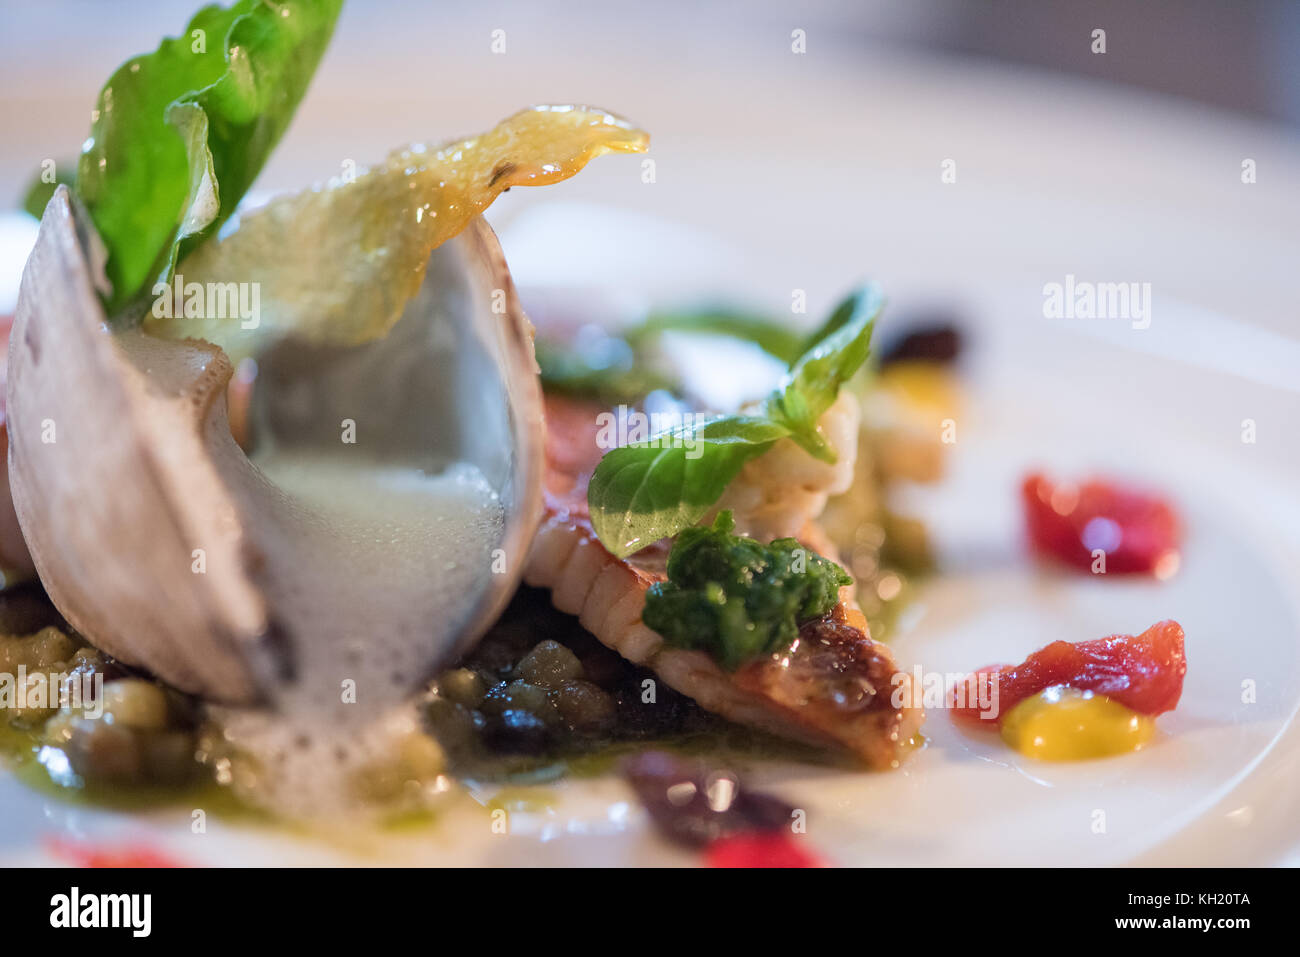 close up of a finished seafood dish Stock Photo